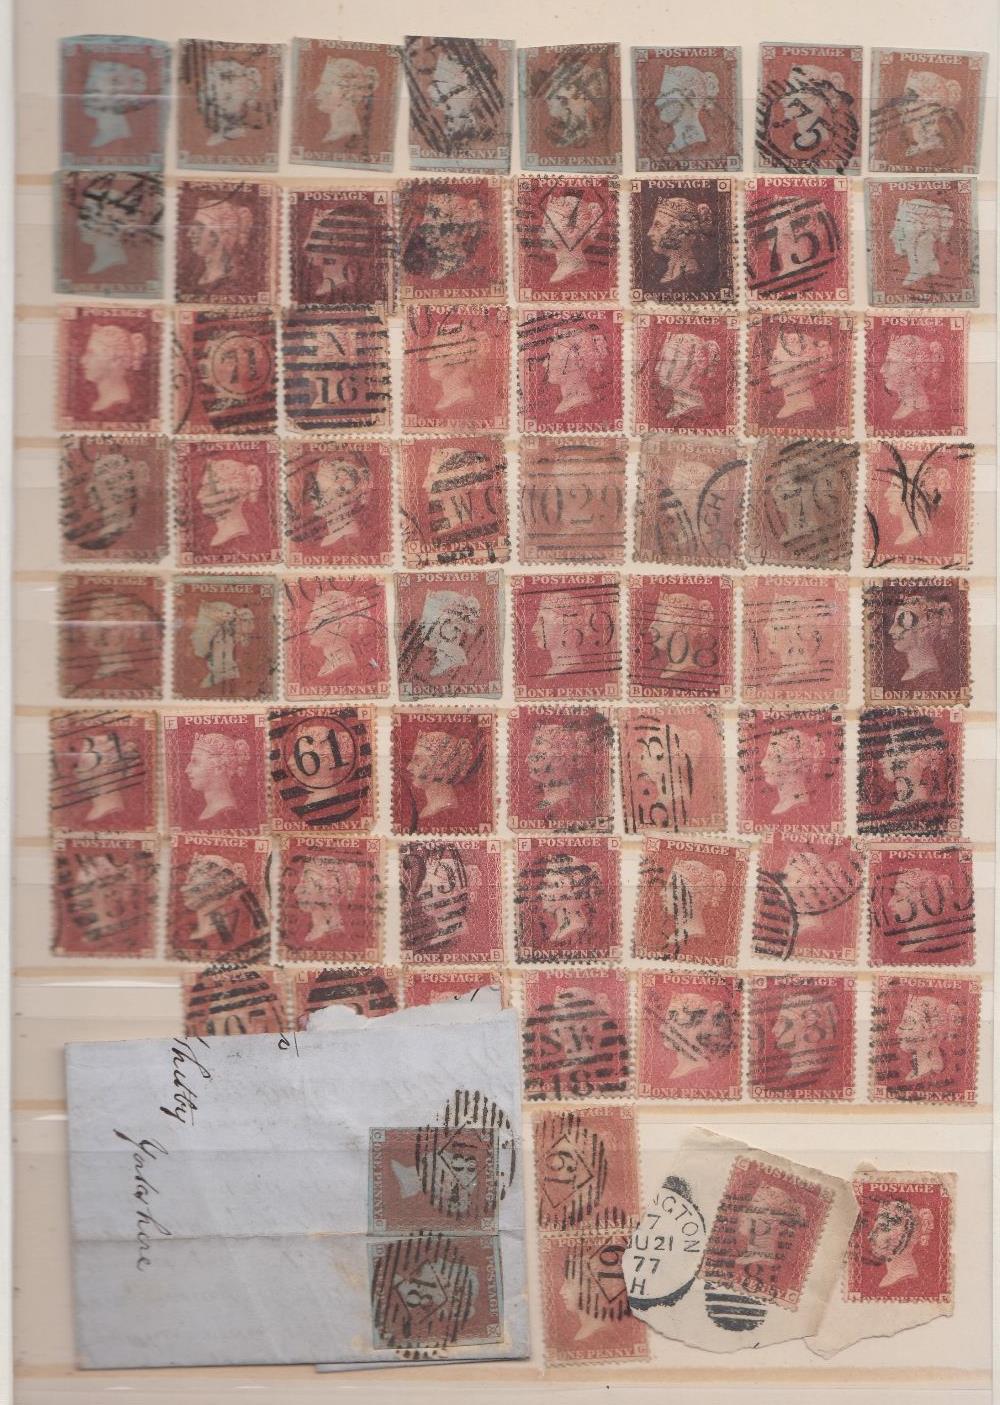 STAMPS GREAT BRITAIN Green stockbook starting with 1841 Penny Reds, through to QEII Castles, - Image 2 of 4